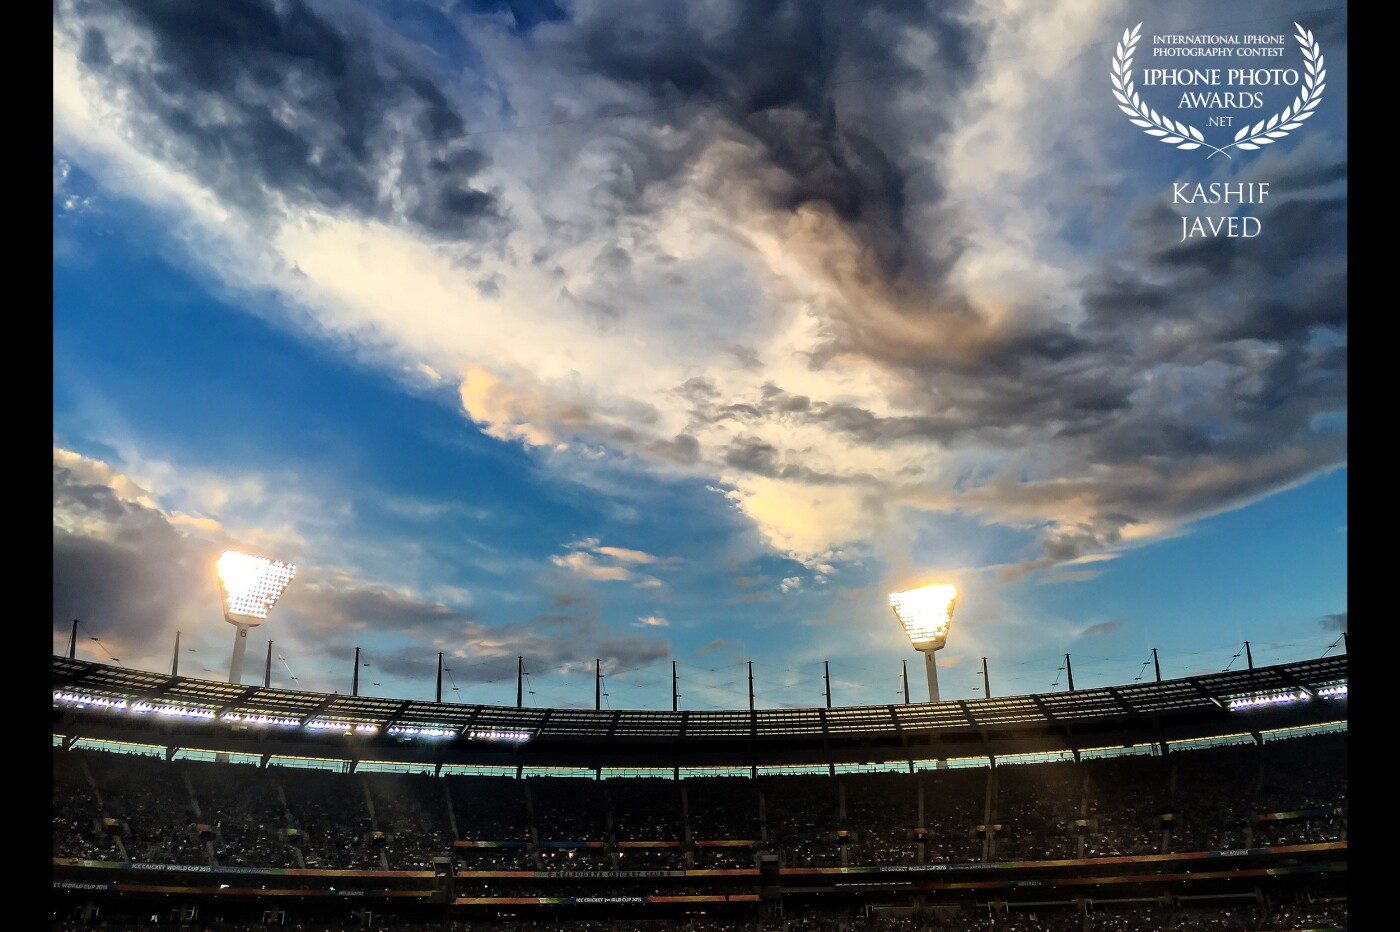 I took this photo while watching a cricket match at iconic Melbourne Cricket Ground (MCG) – Australia. It was just an awe moment spotting this beautiful cloud formation, it gives the impression that MCG is orbiting the earth.<br />
‘Once you are in the orbit of your destiny, weightlessness is the only result.’ — Baba Amte.